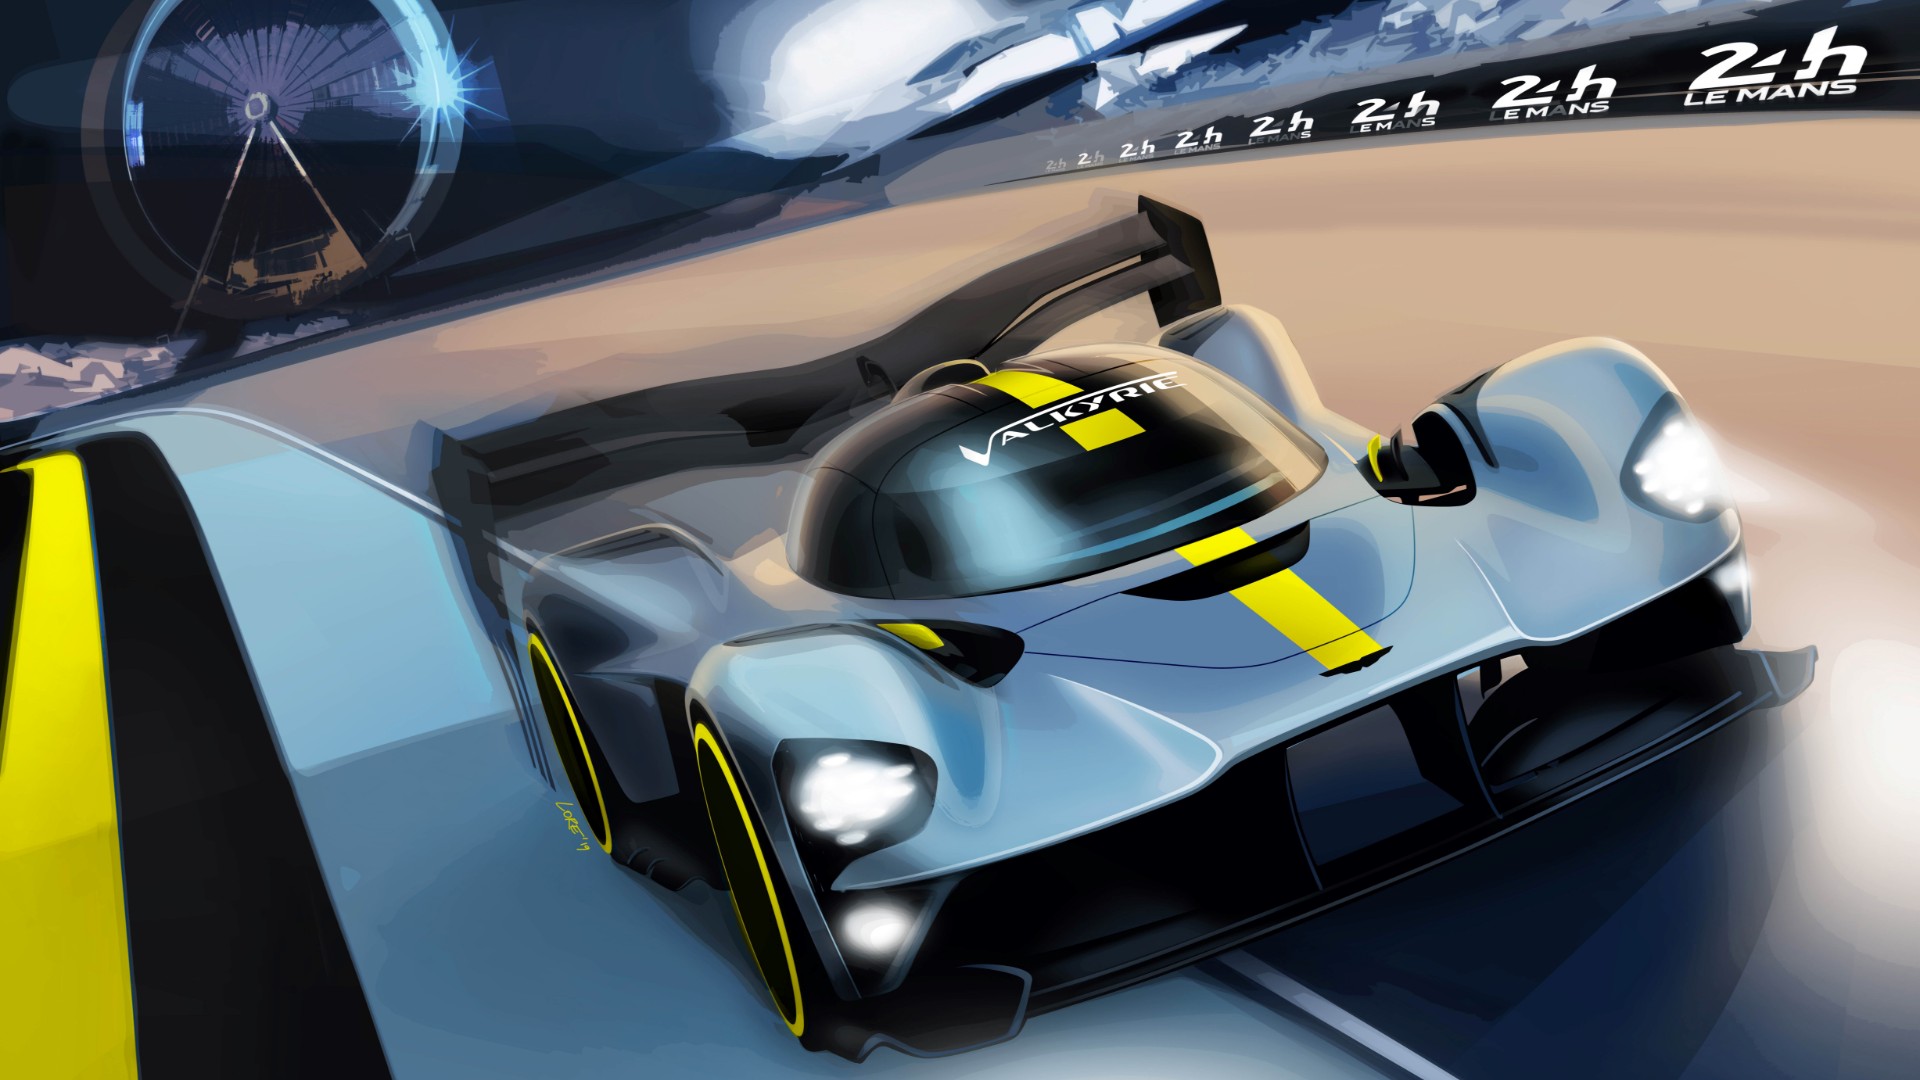 Aston Martin Valkyrie to race at Le Mans